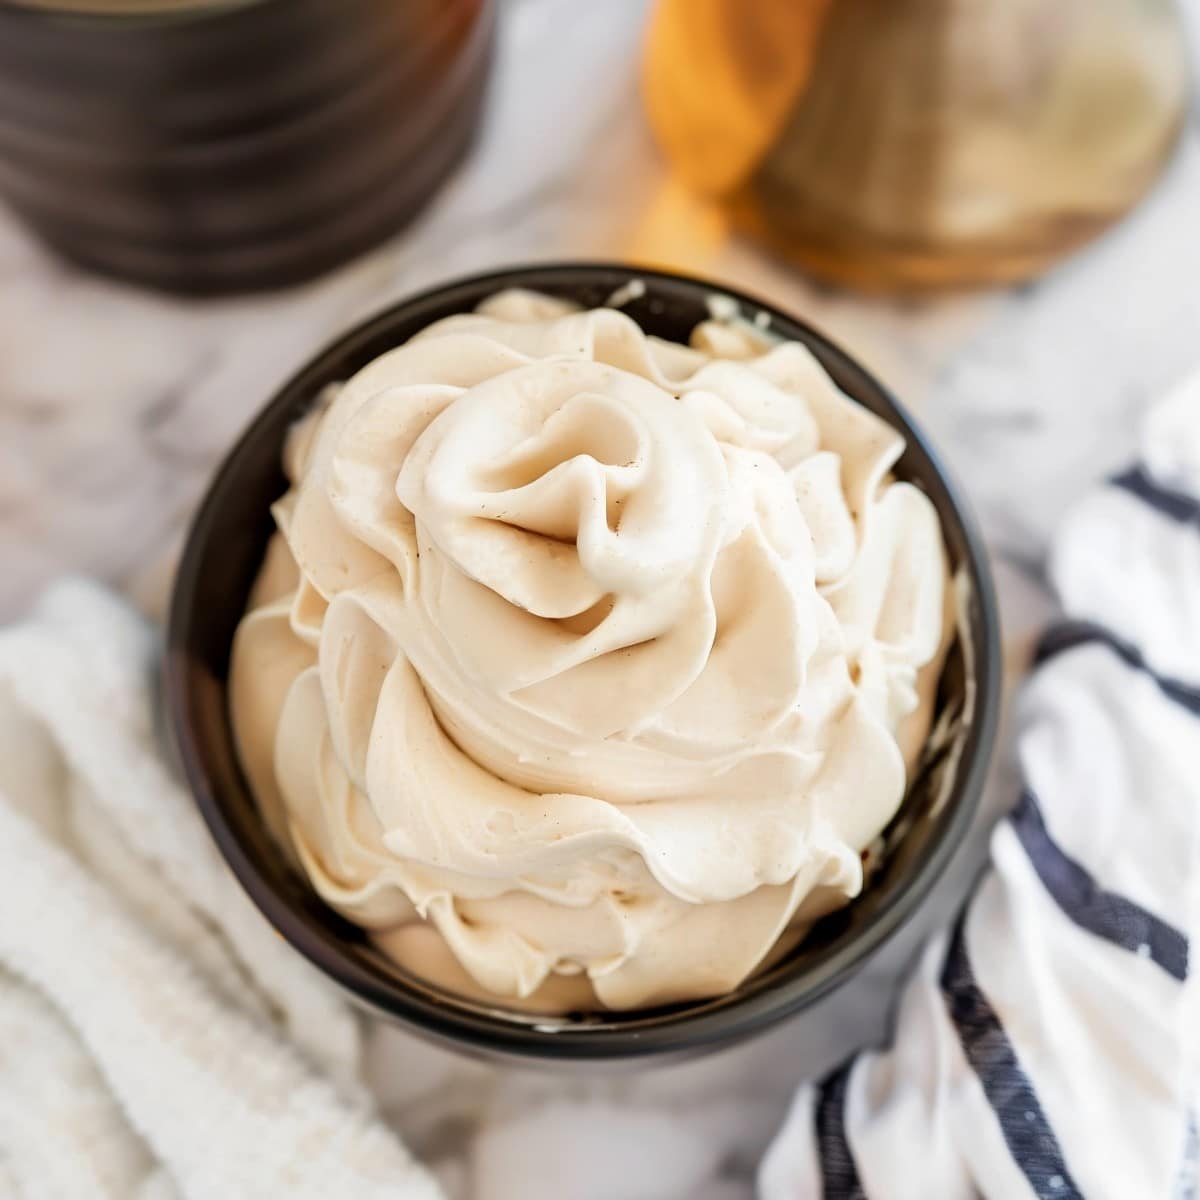 Heavenly Kahlua whipped cream, enhancing the flavor of desserts with its subtle coffee notes and velvety texture